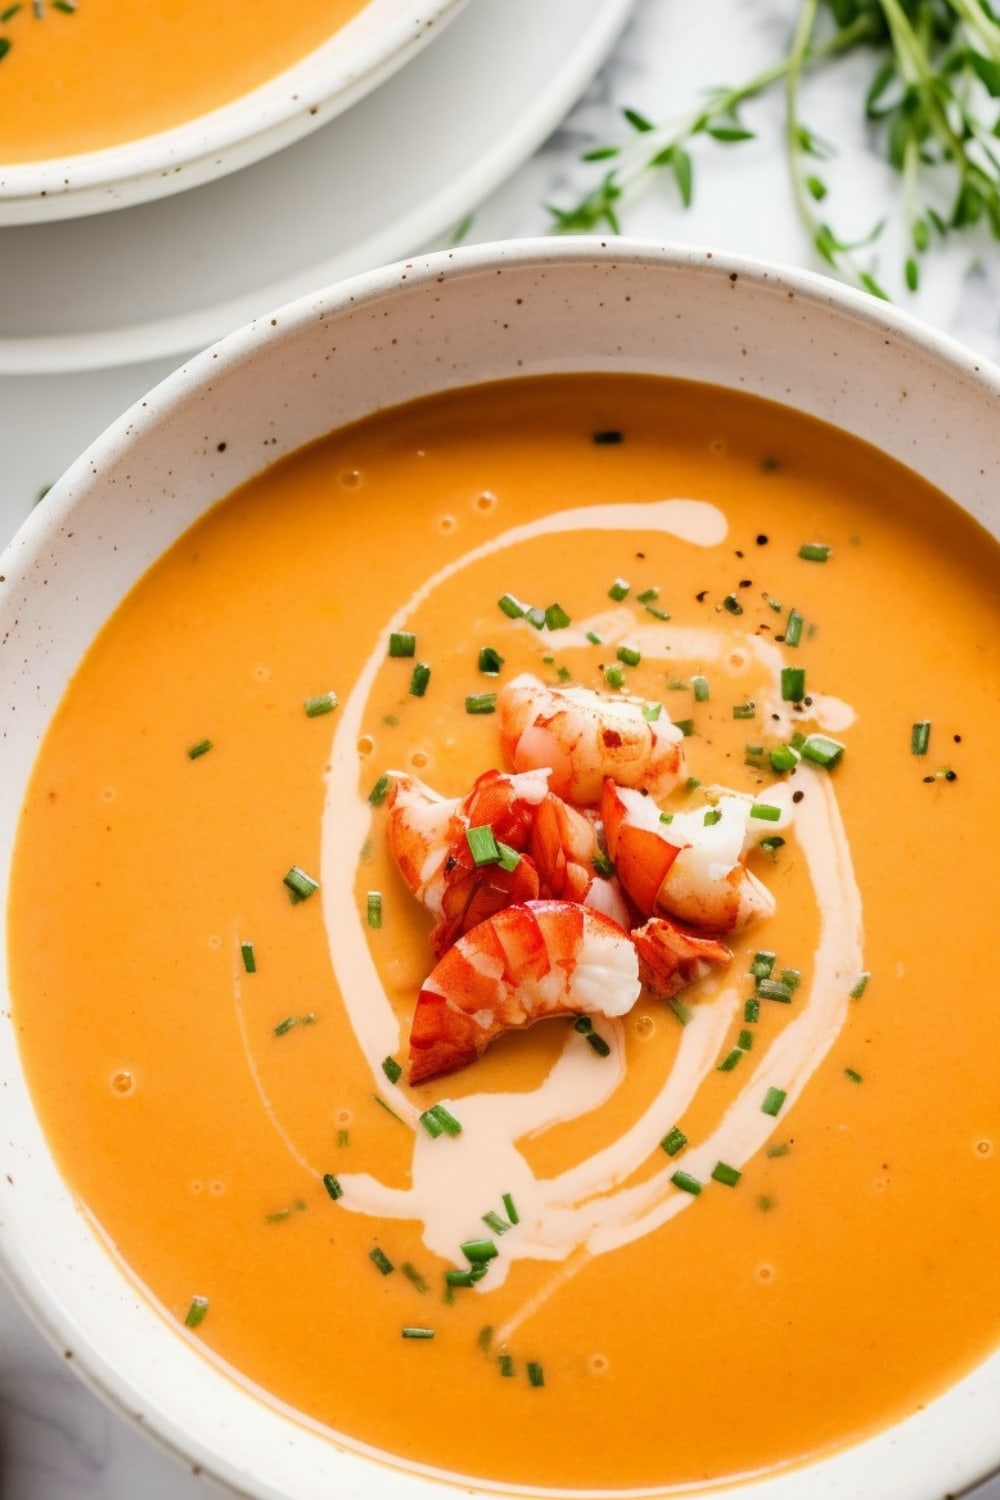 Lobster bisque in a bowl.